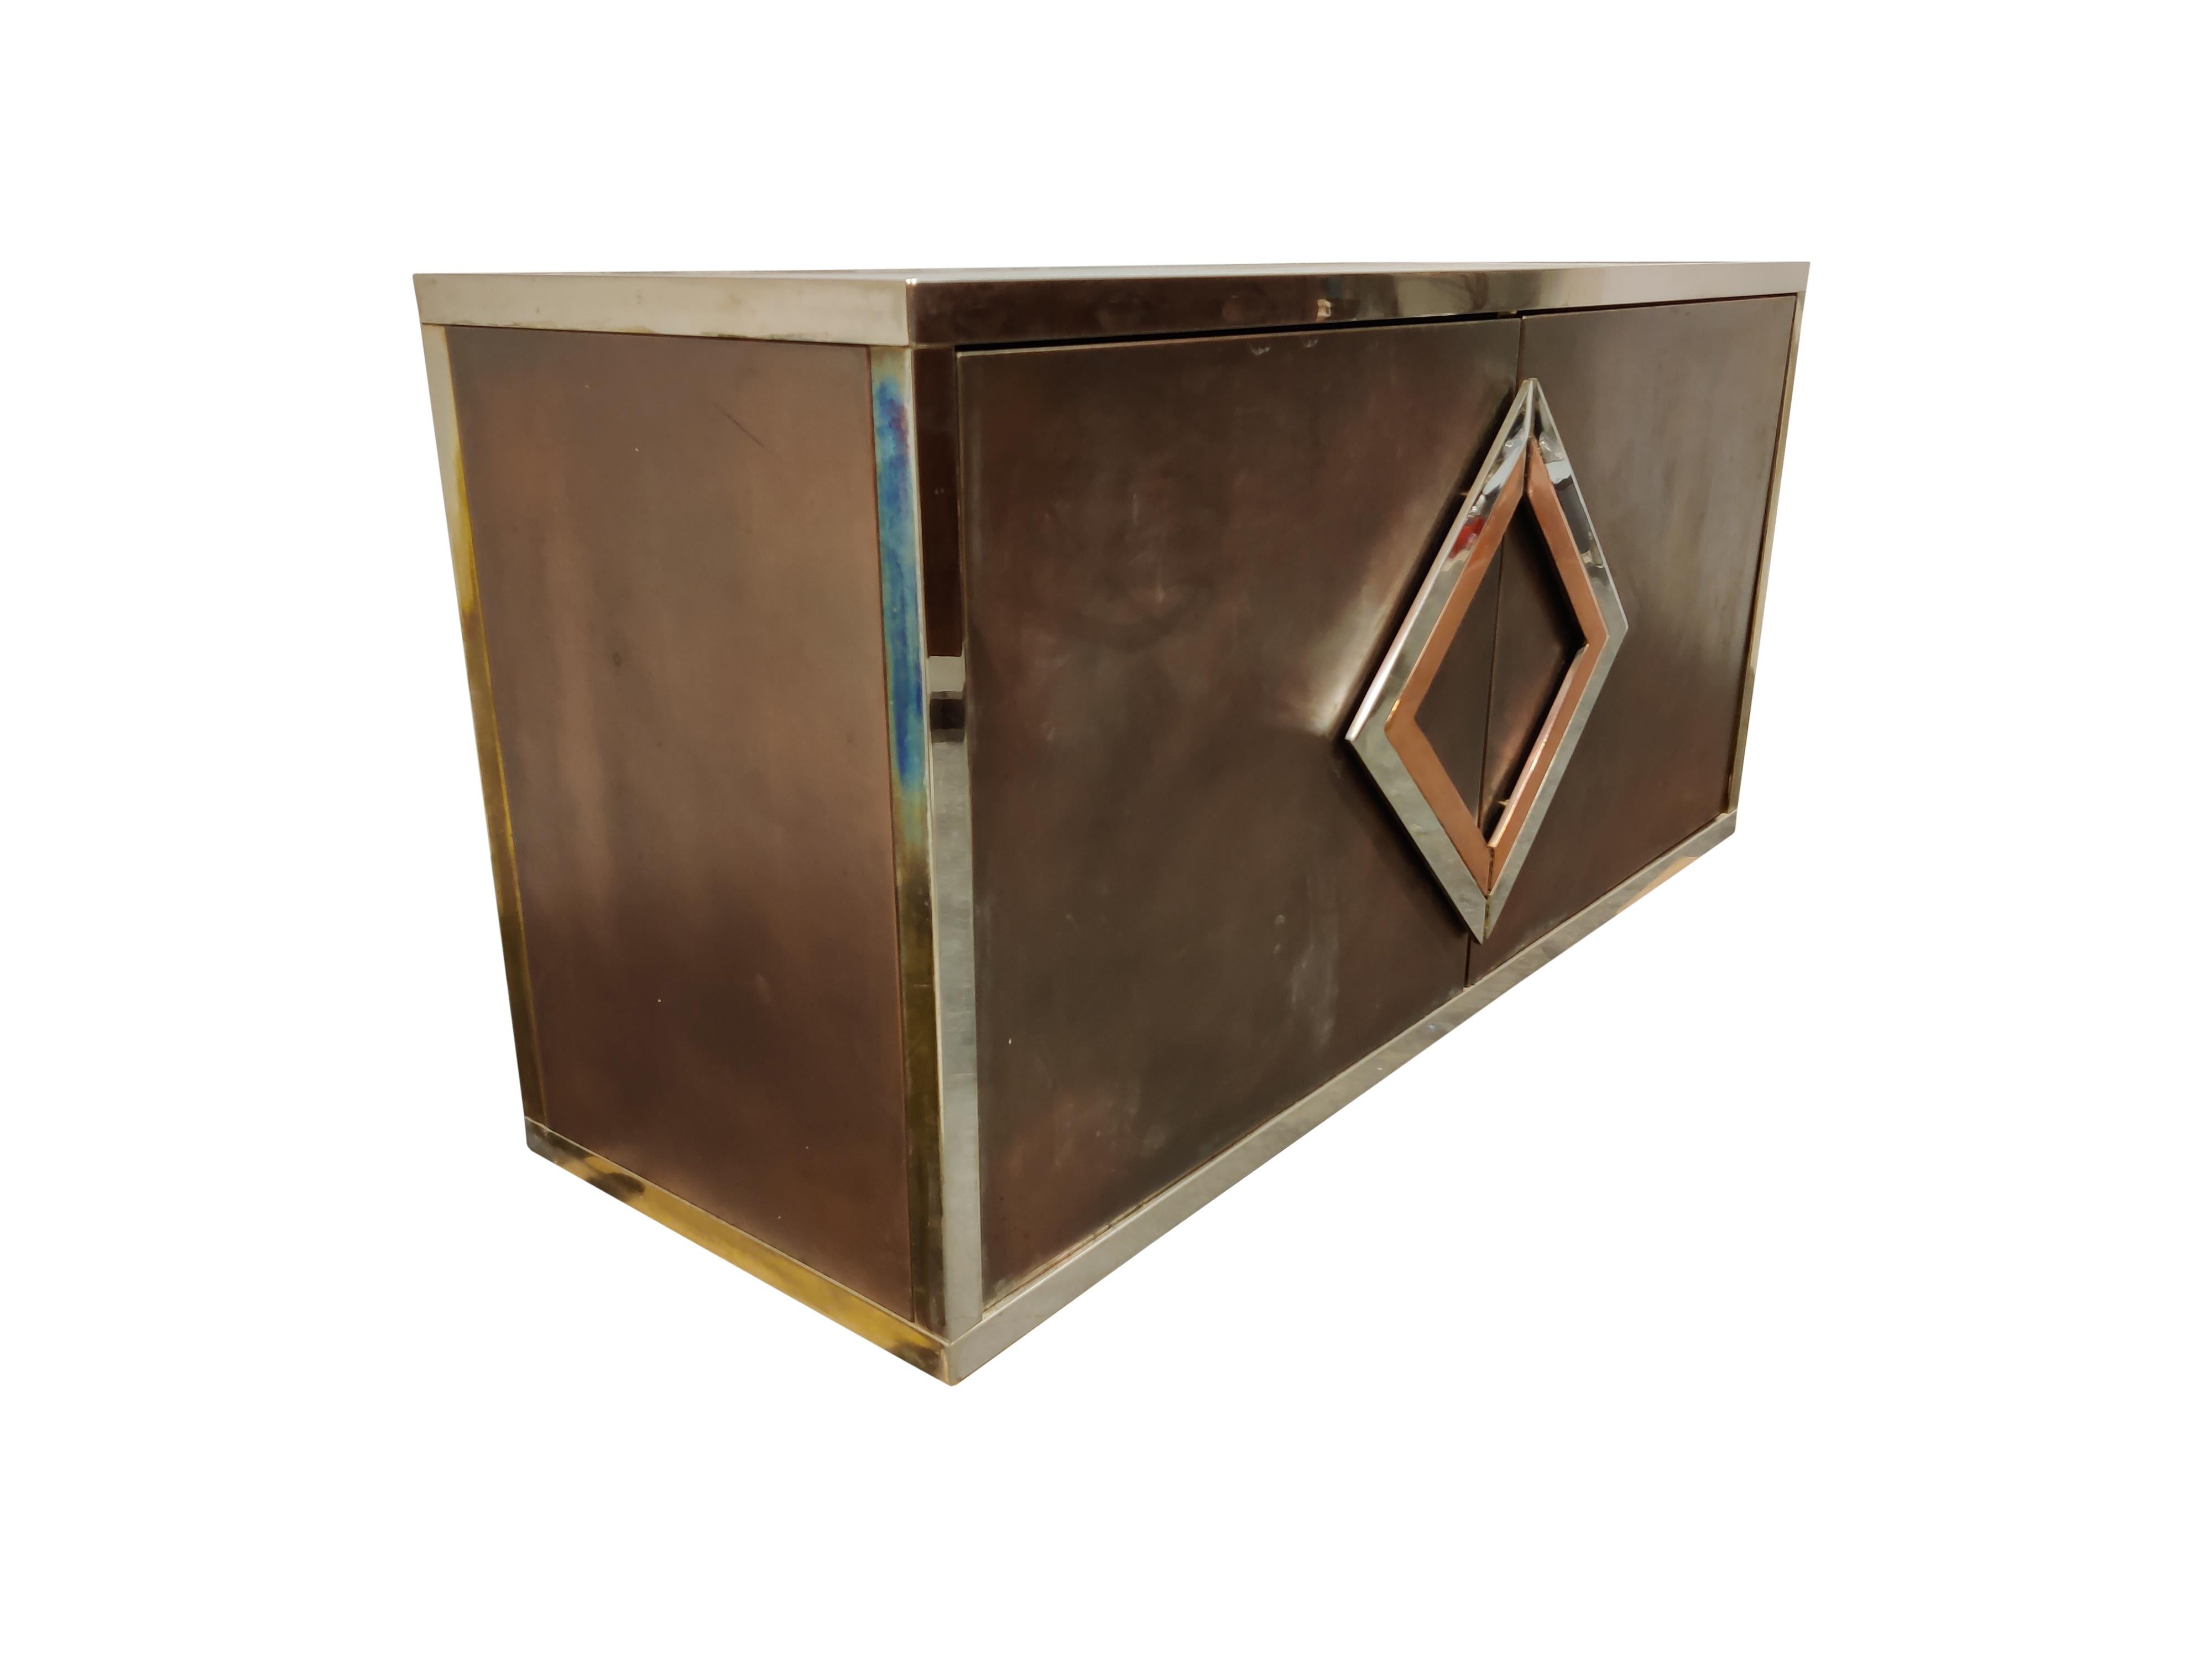 Vintage red copper, brass and chrome sideboard by Maison Jansen.

The cabinet has two large doors with unique geometrical handles and glass shelves inside.

Its made from a brass, chrome frame and red copper panels. 

Although the brass is